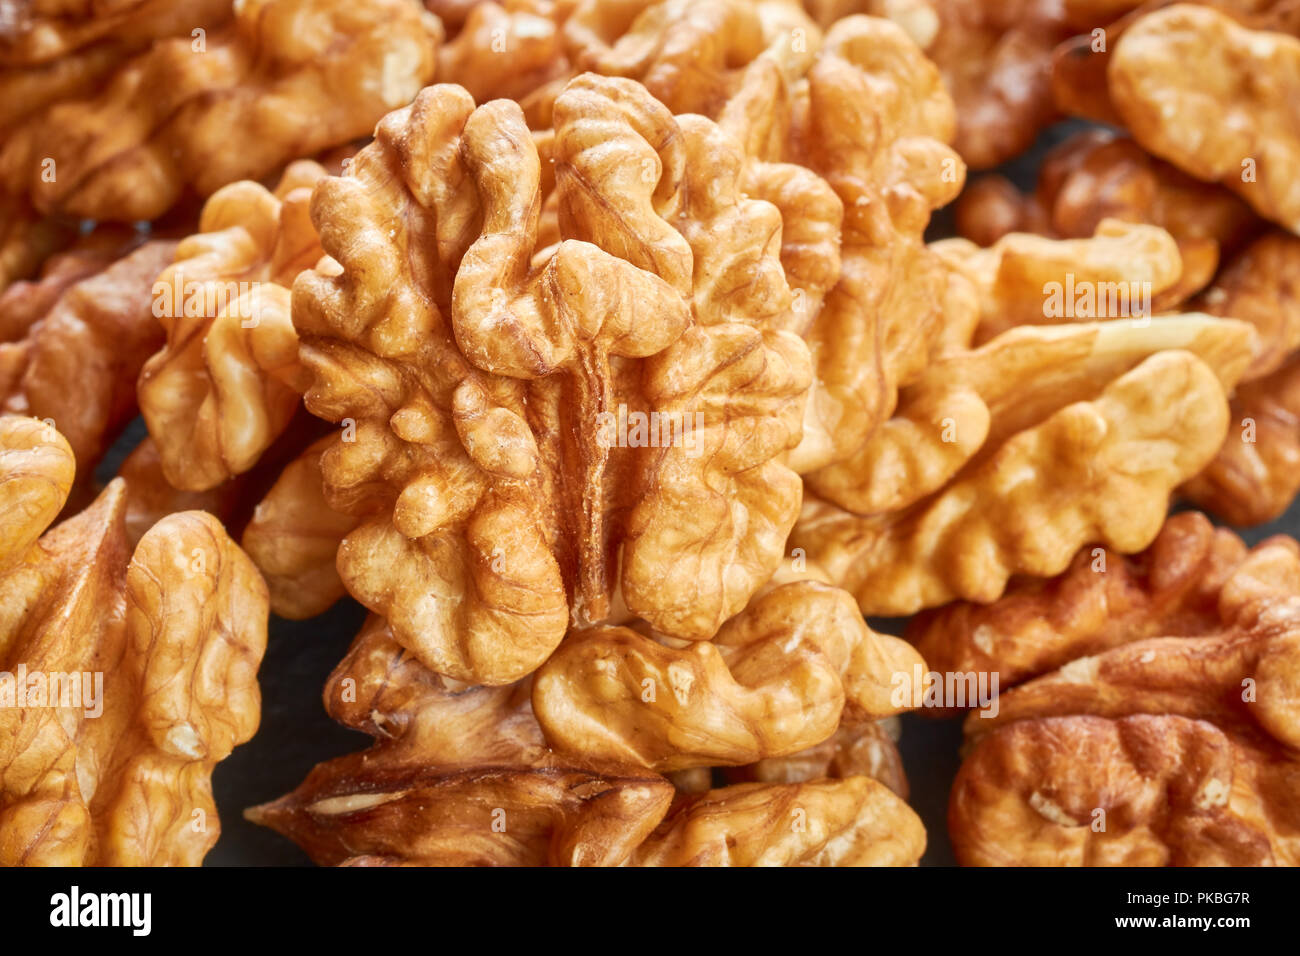 Close up picture of walnuts, selective focus. Stock Photo